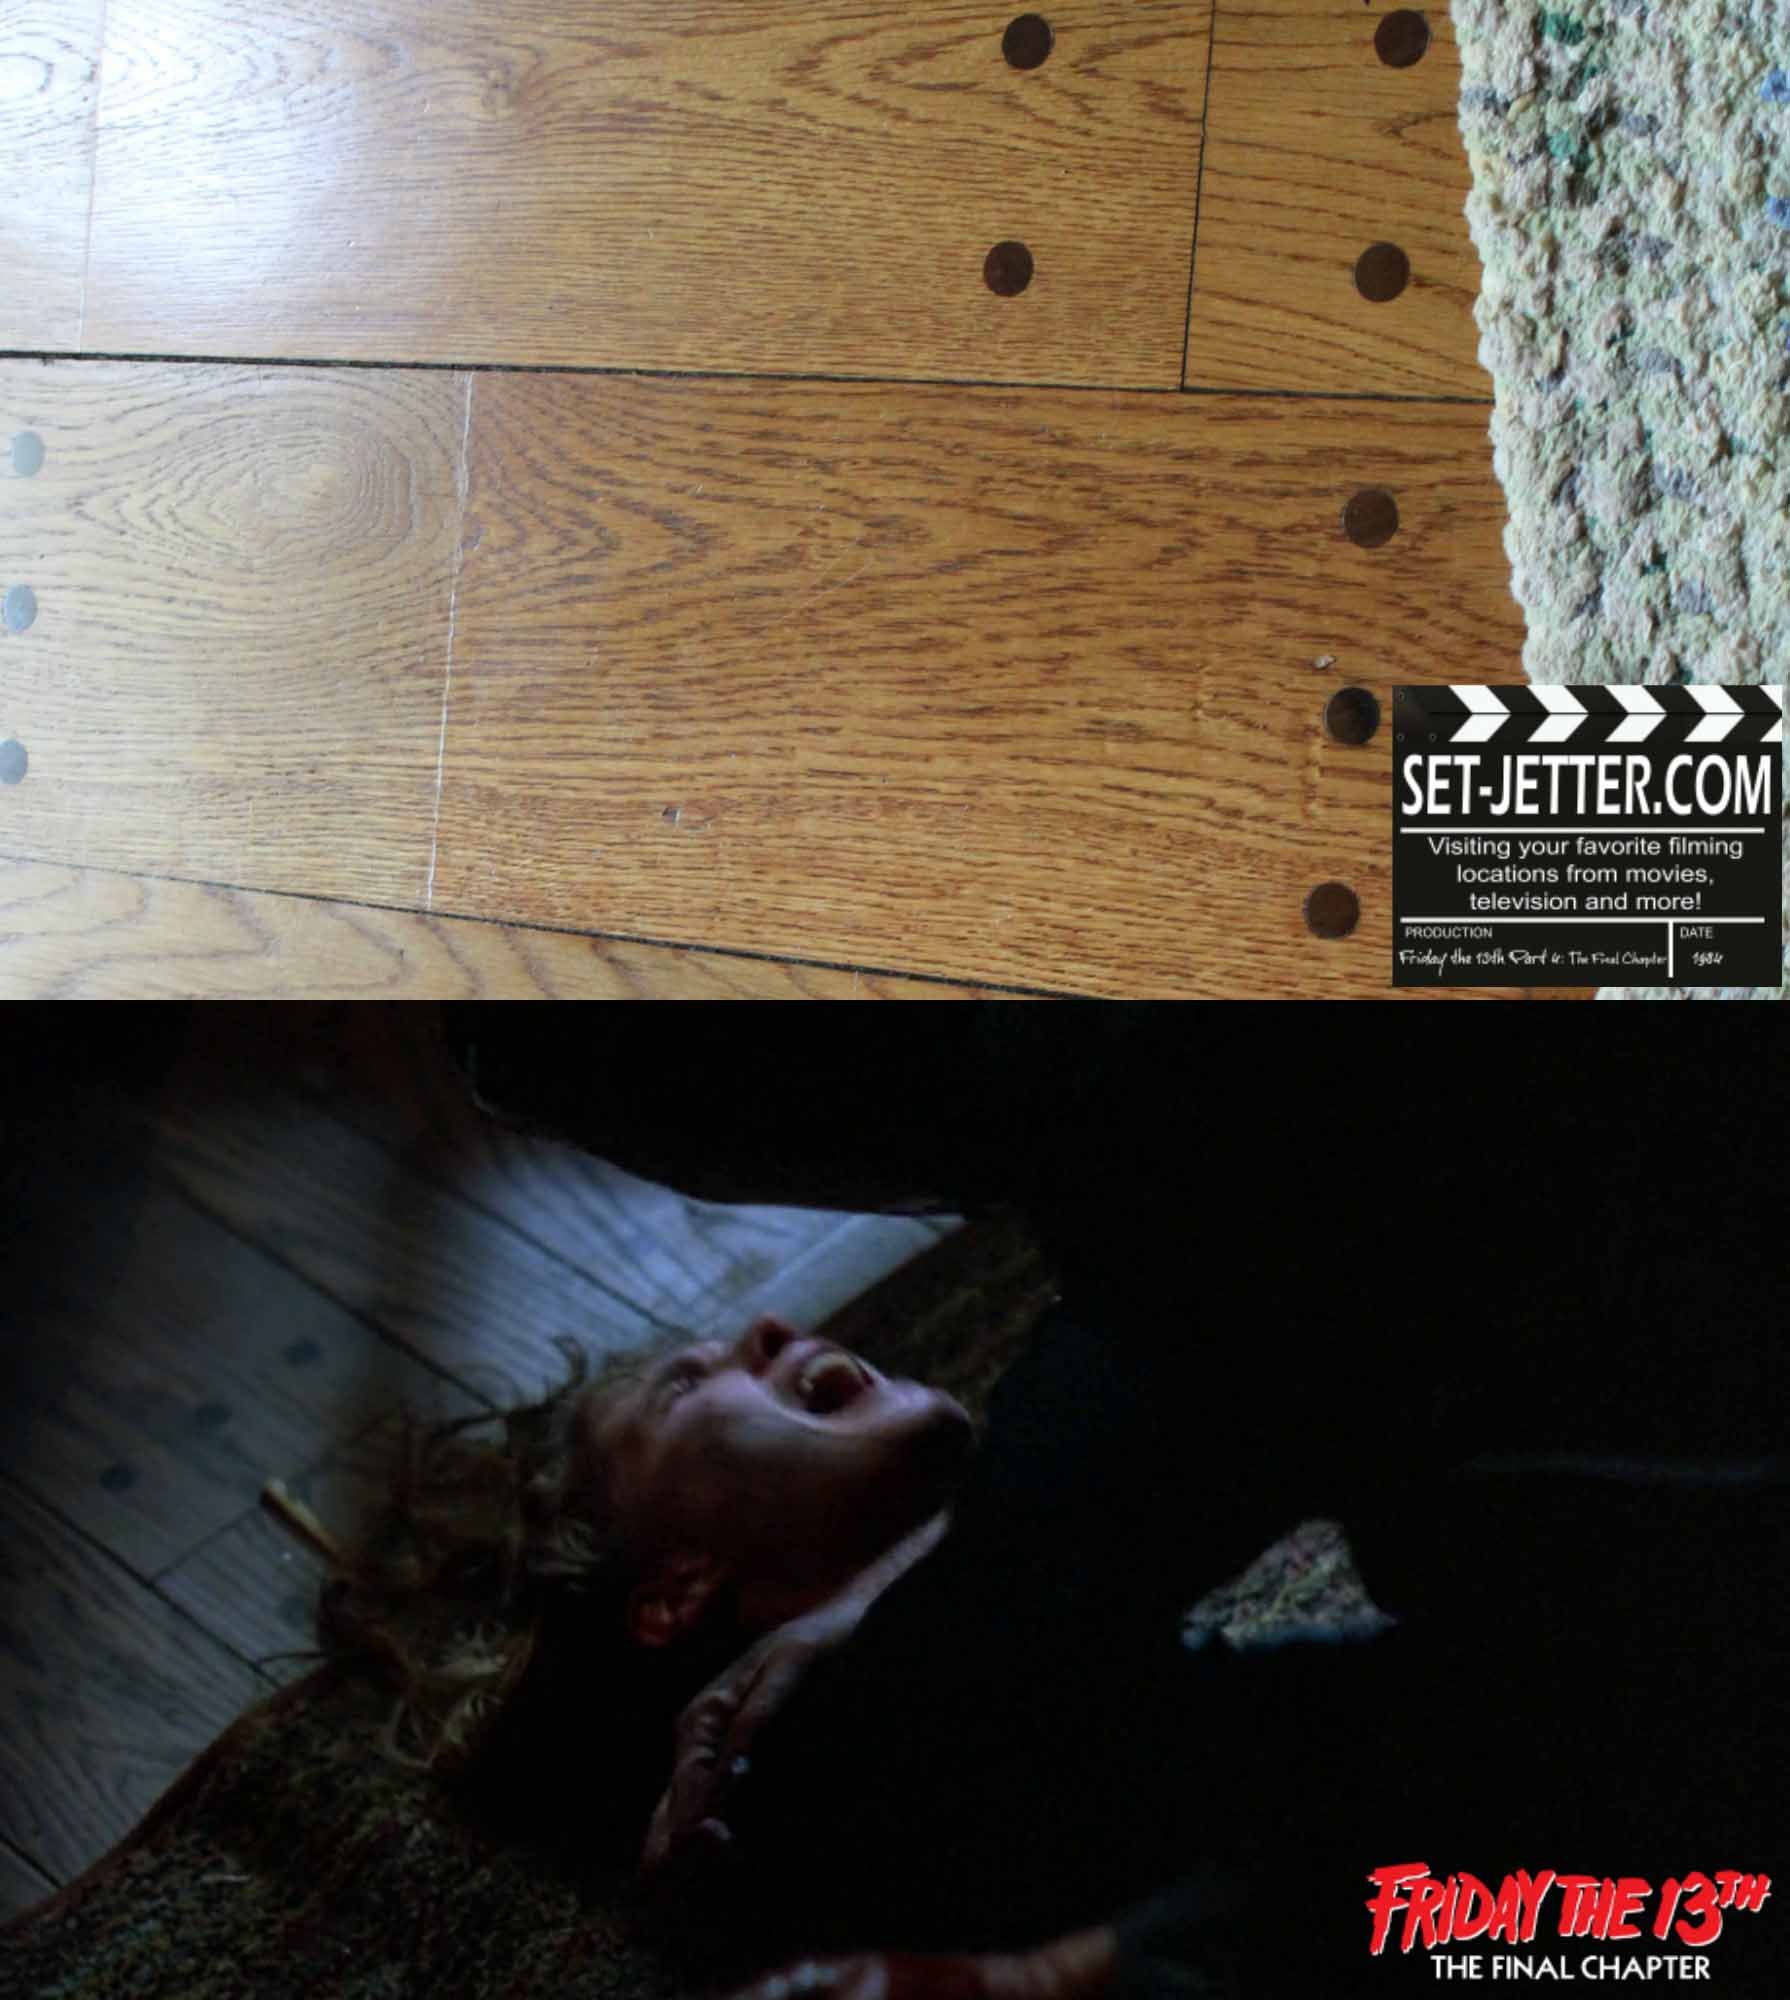 Friday the 13th The Final Chapter comparison 316.jpg